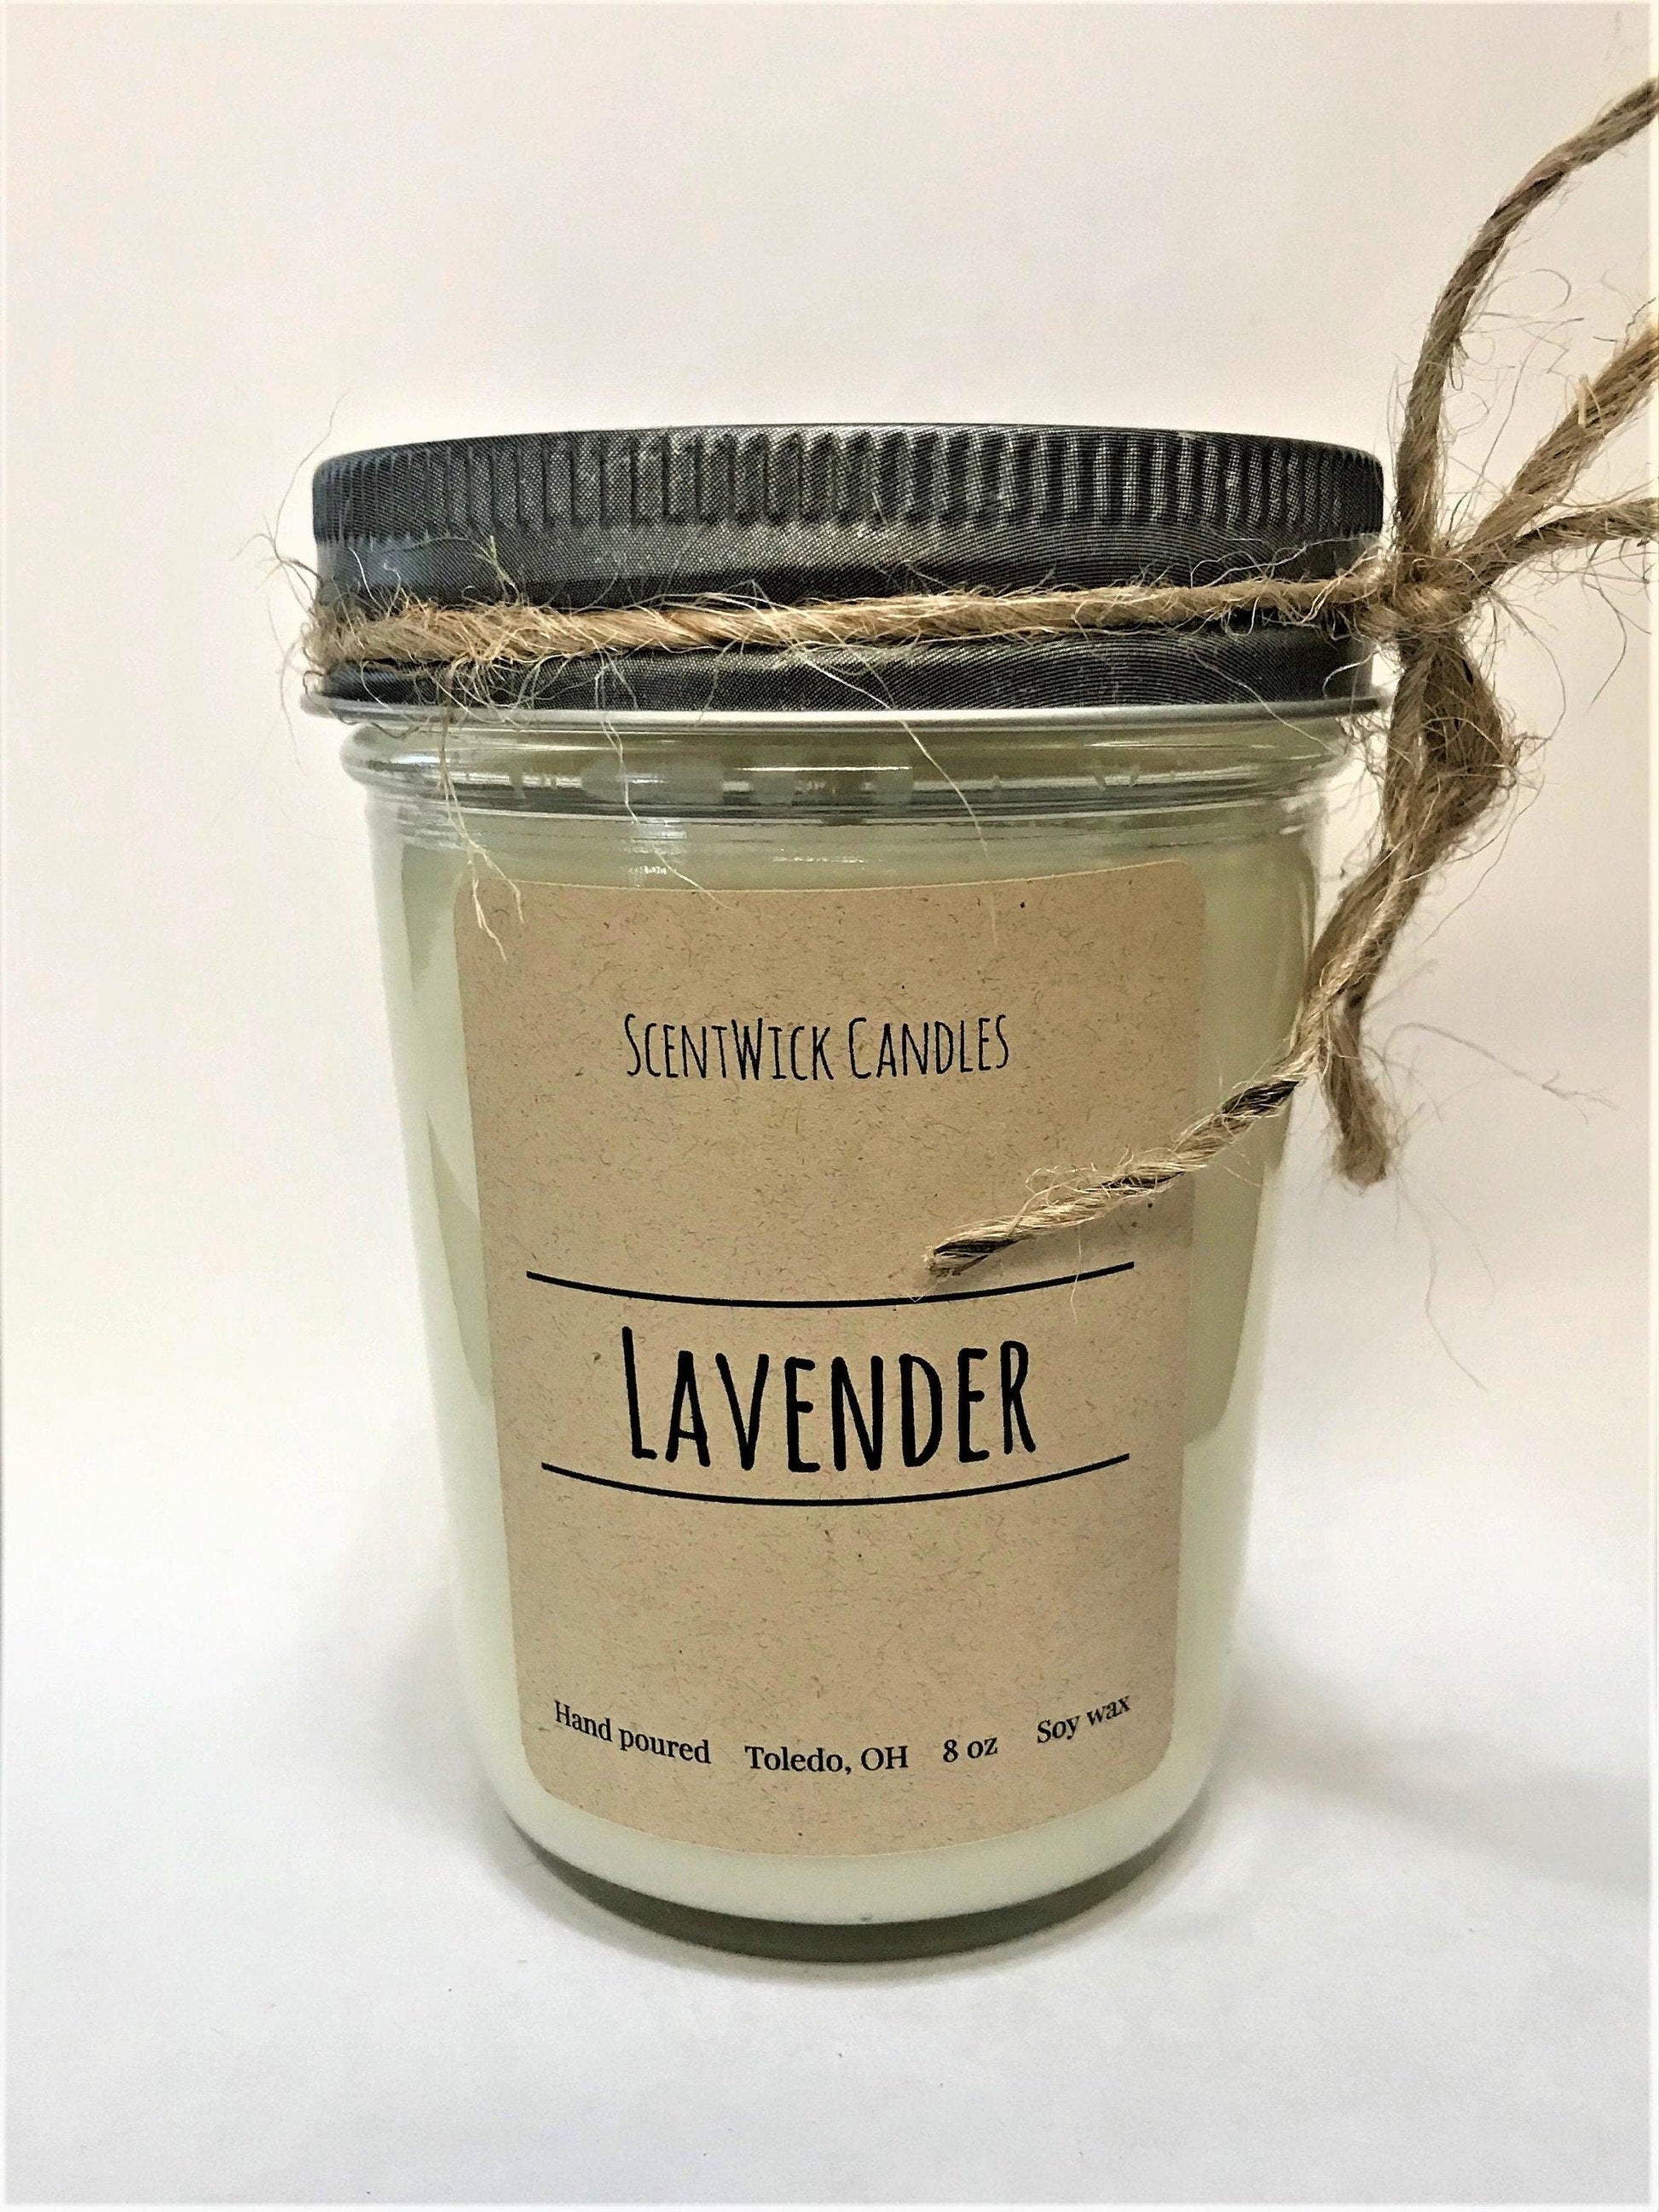 Lavender - ScentWick Candles